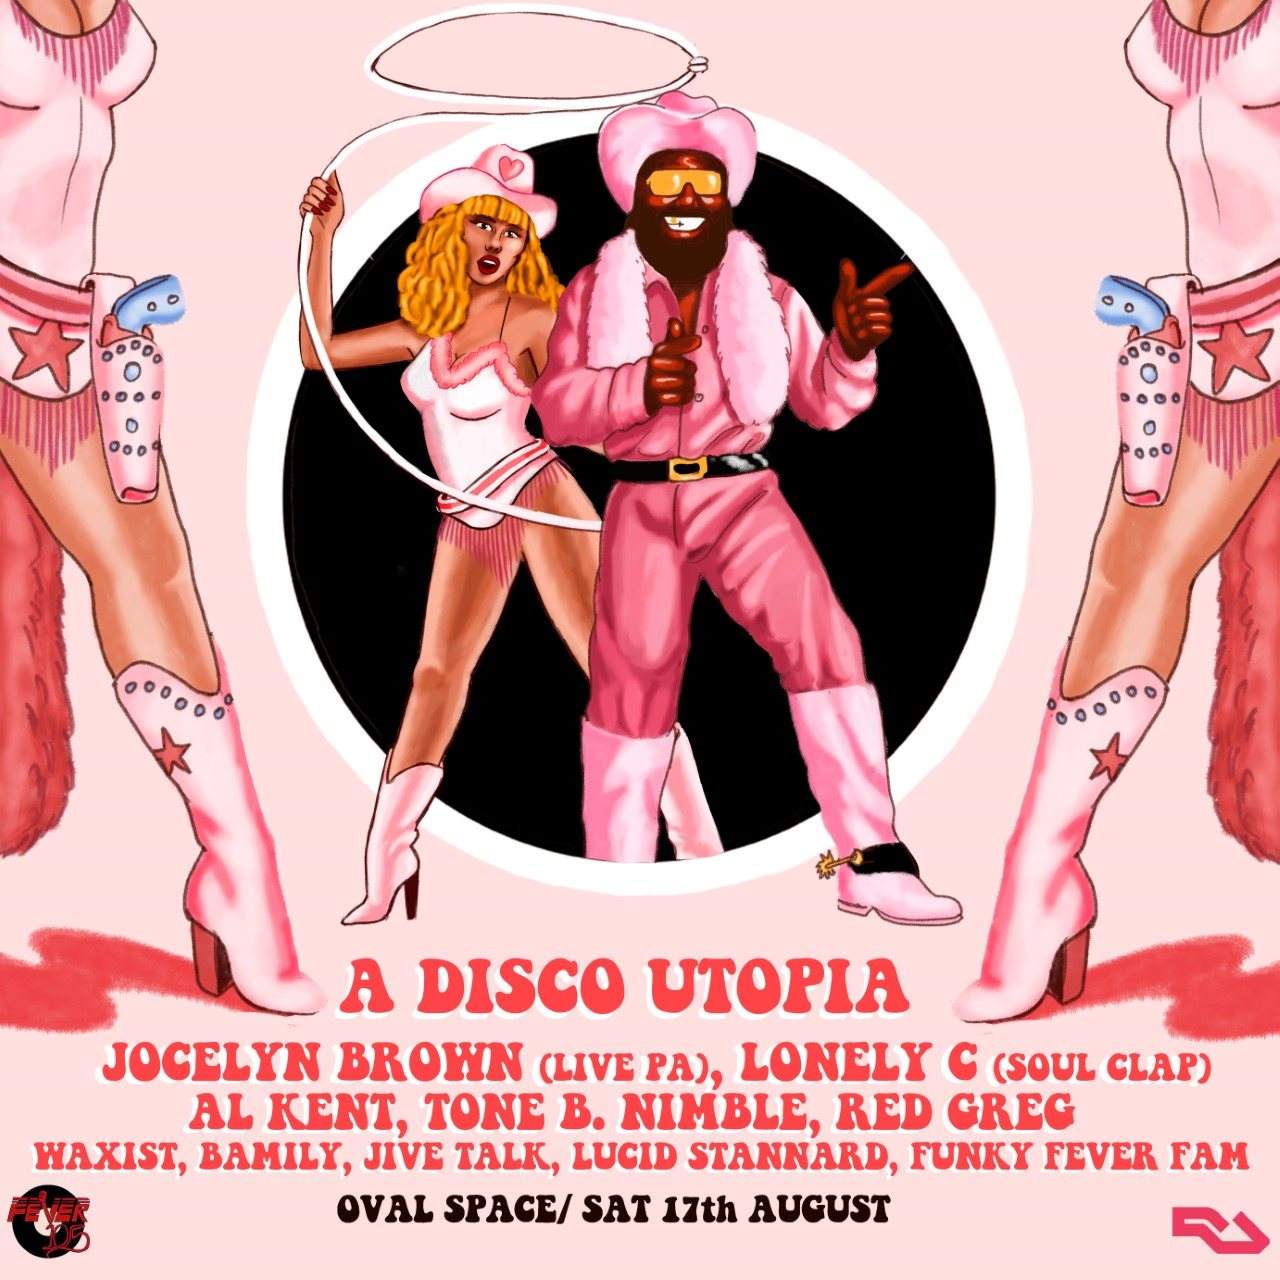 Fever 105's 'A Disco Utopia' with Jocelyn Brown, Lonely C/Soul Clap, Red Greg, Al Kent & More - フライヤー裏